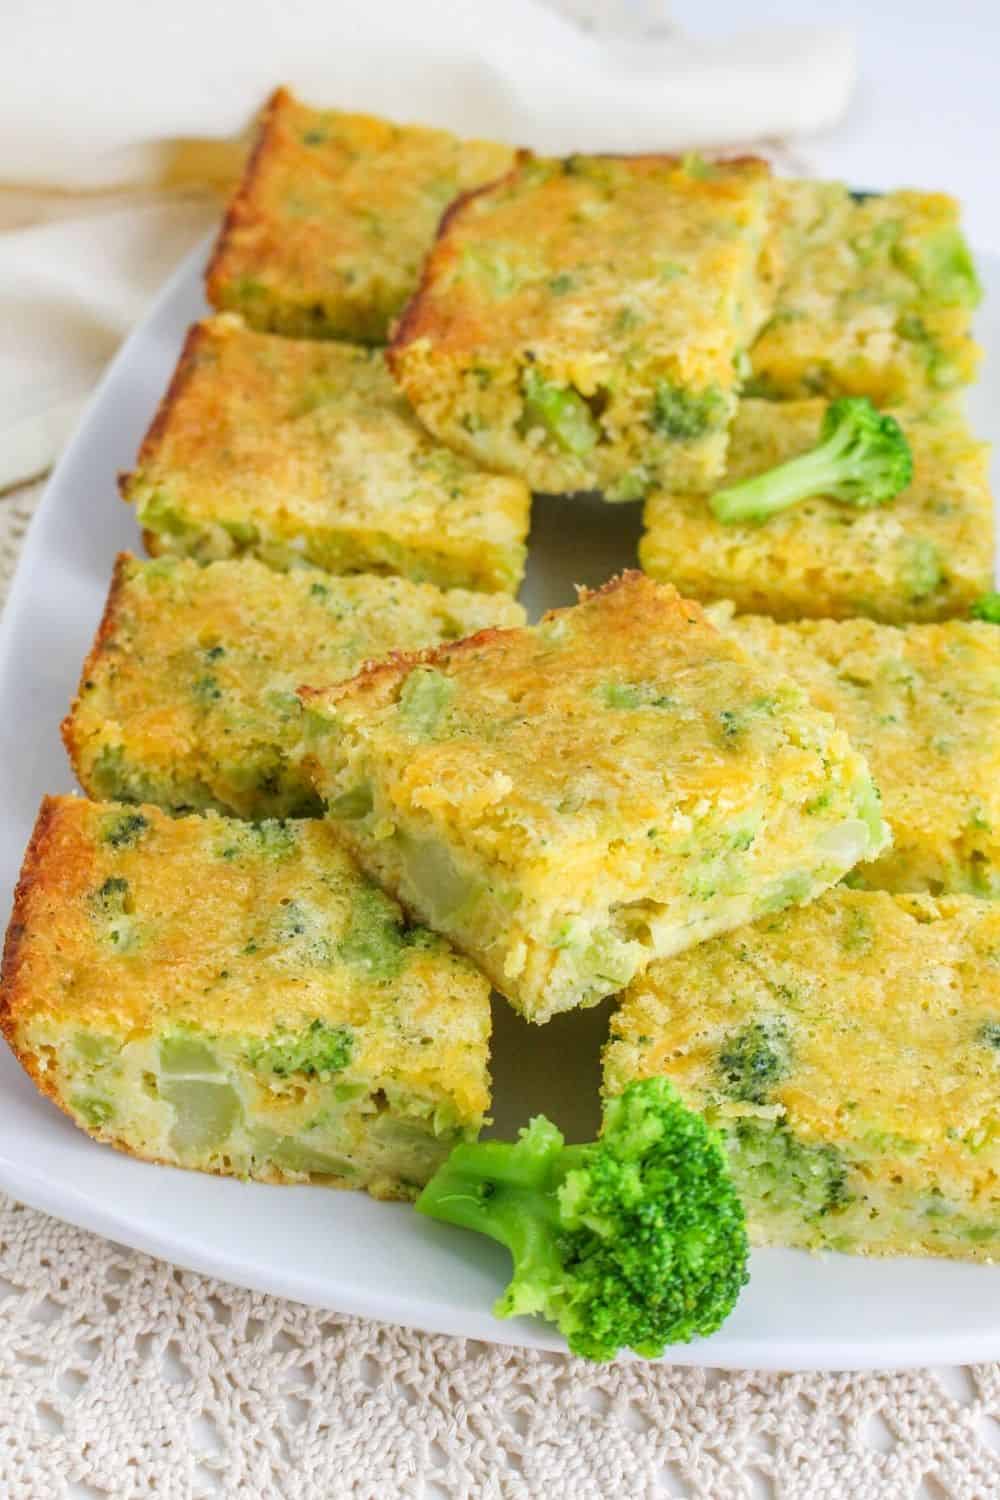 a white platter serves pieces of Jiffy broccoli cornbread with cheese. The platter is garnished with pieces of broccoli.